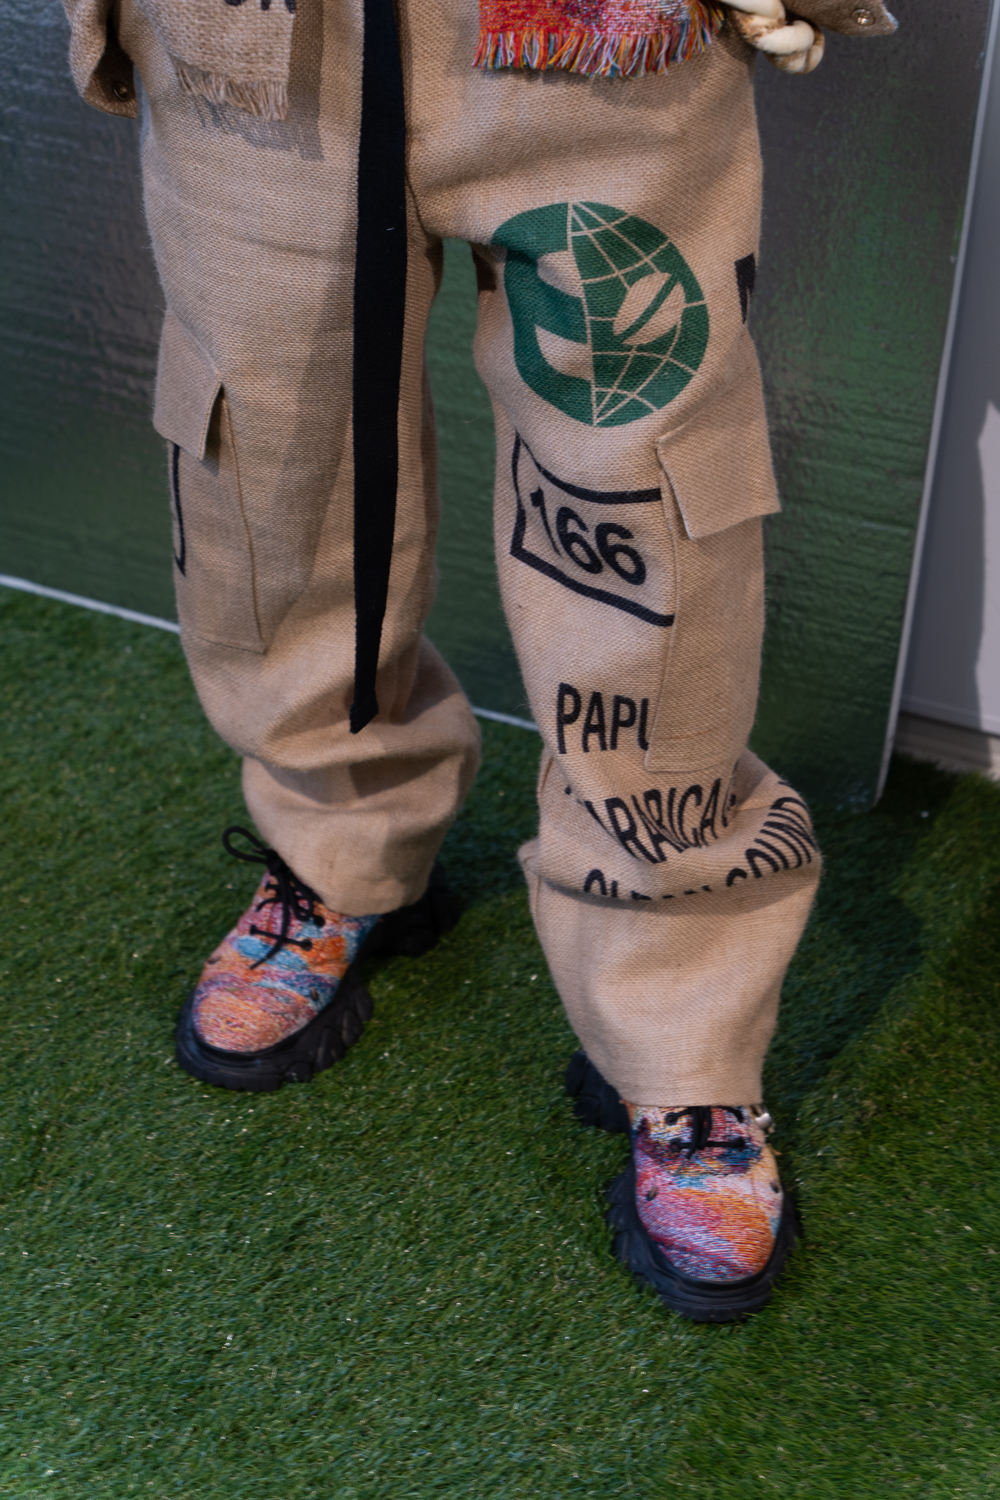 A close-up photo of a model wearing beige nylon pants and boots with colorful patterns. The model is standing on artificial turf and wearing clothing from the brand Skyco.